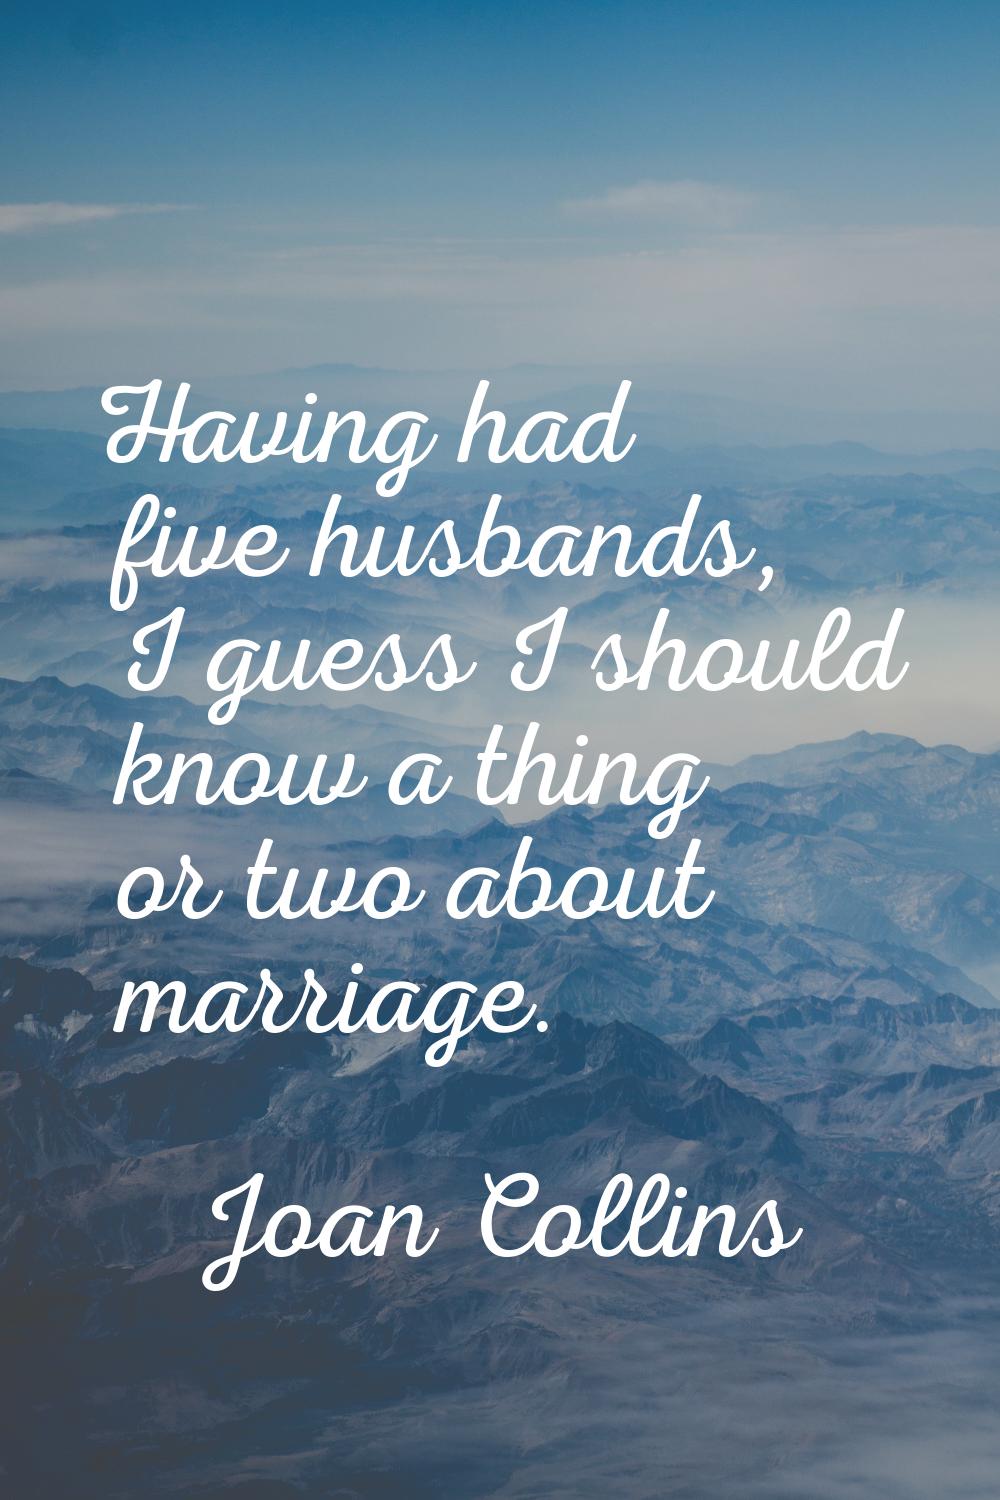 Having had five husbands, I guess I should know a thing or two about marriage.